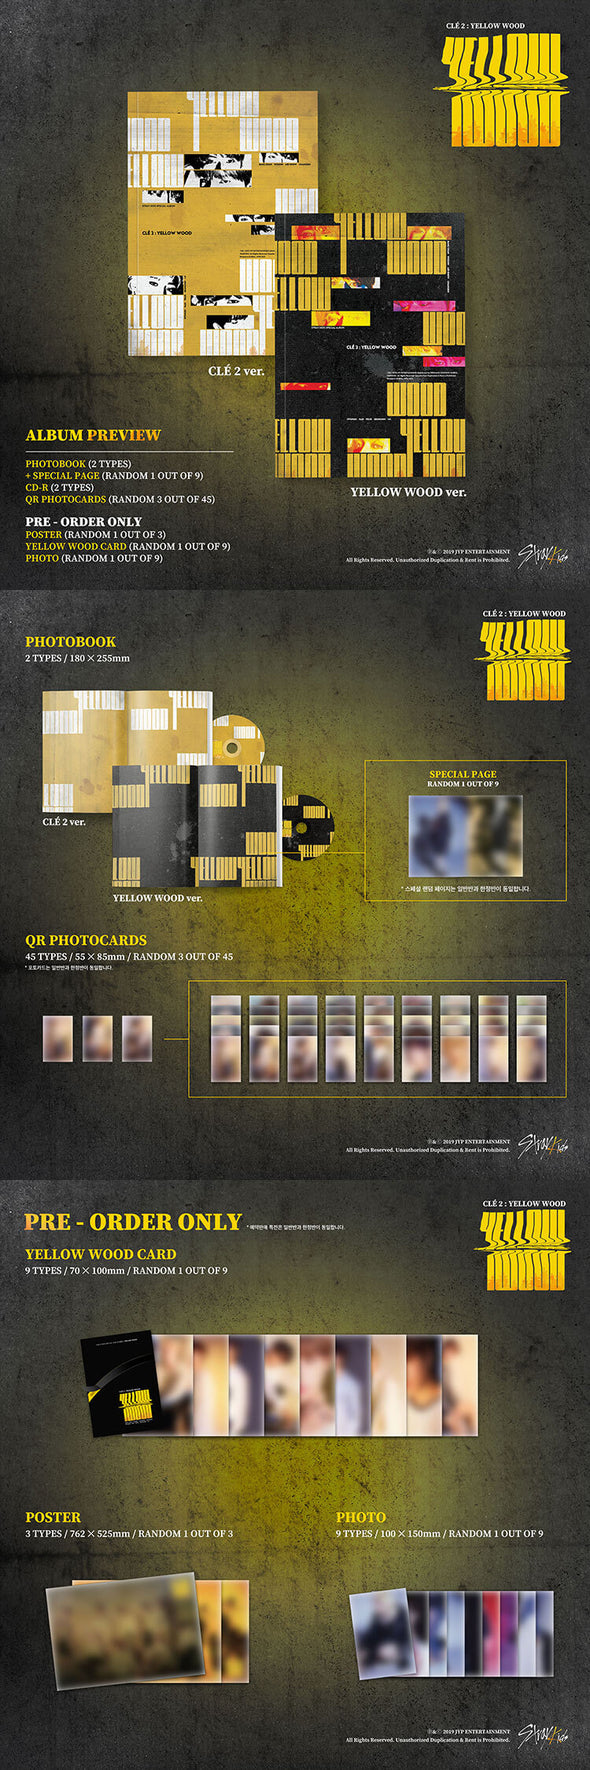 STRAY KIDS - Special Album 'Cle 2: Yellow Wood'